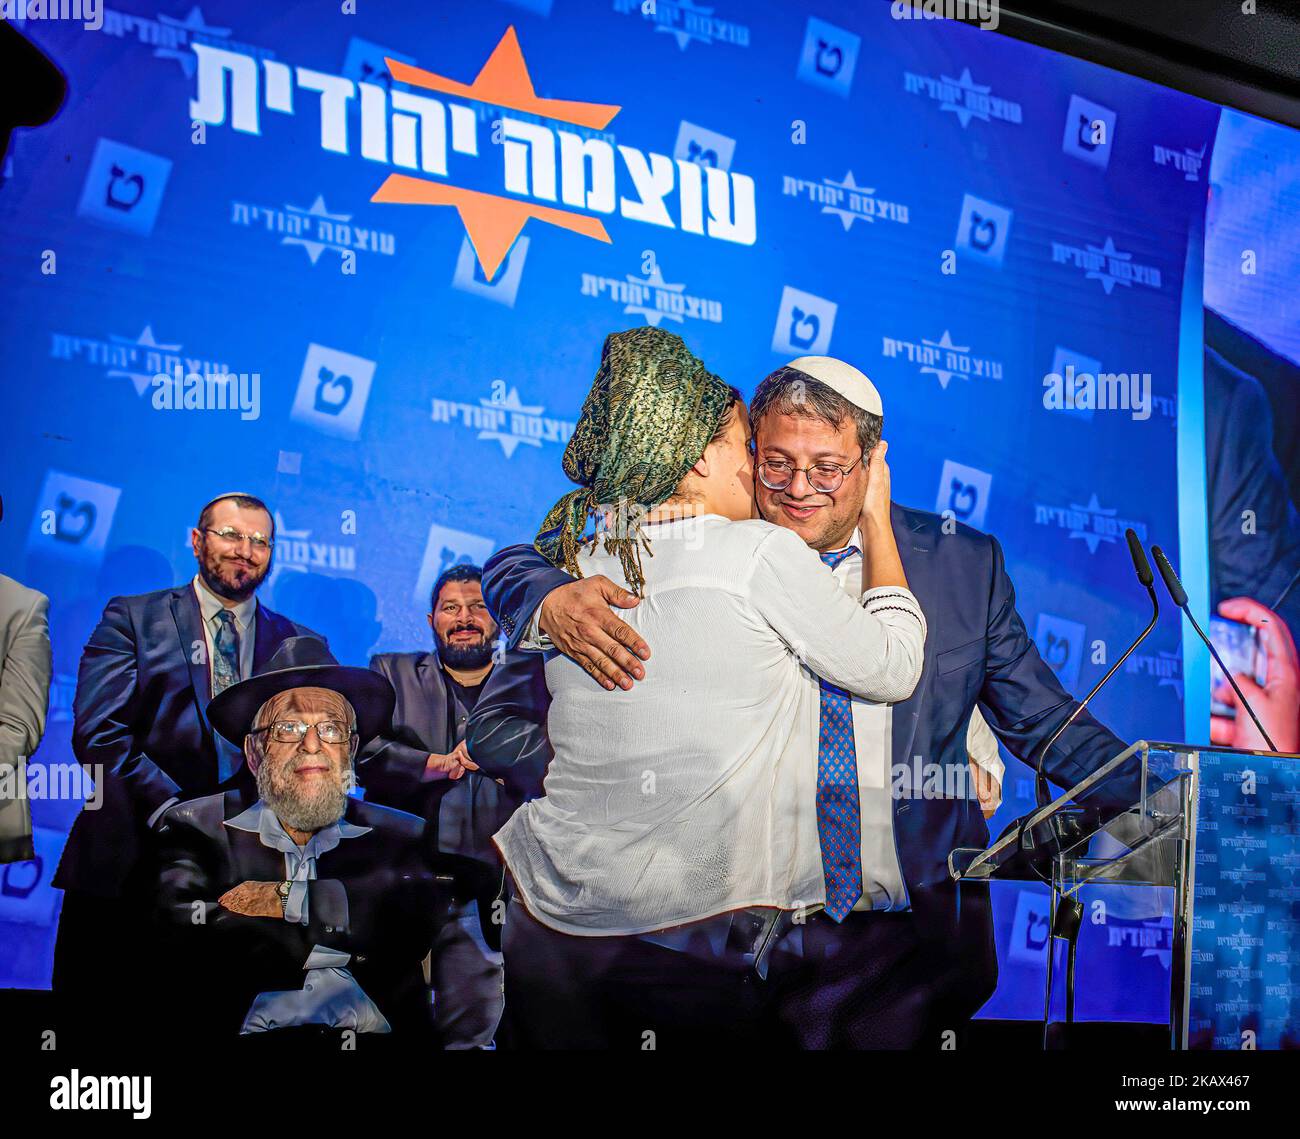 Jerusalem, Israel. 02nd Nov, 2022. Leader of the ultranationalist party Otzma Yehudity ( Jewish Strength ) Itamar Ben-Gvir and his wife Ayalah in Jerusalem after hearing the results of the exit polls giving his party 14 seats in the parliament. With more than 90% of the votes counted former Israeli Prime Minister Benjamin Netanyahu and his block of parties are set to win 65 seats out of the 120 seat Parliament. A come back for Netanyahu, the religious and extreme right nationalist block that he leads. Credit: SOPA Images Limited/Alamy Live News Stock Photo